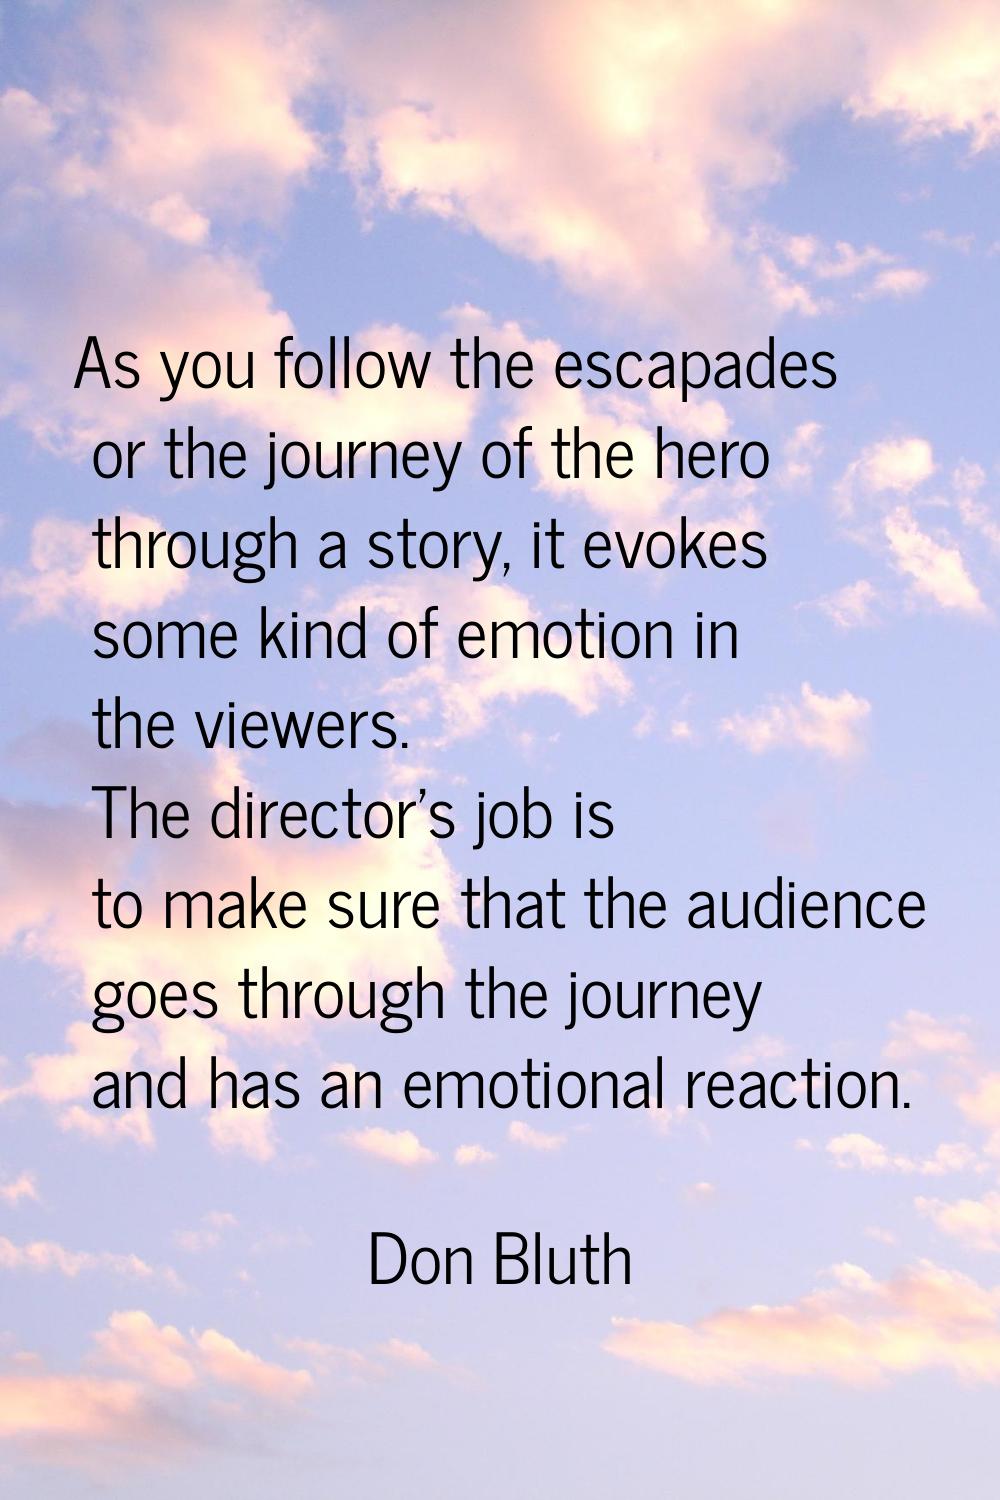 As you follow the escapades or the journey of the hero through a story, it evokes some kind of emot